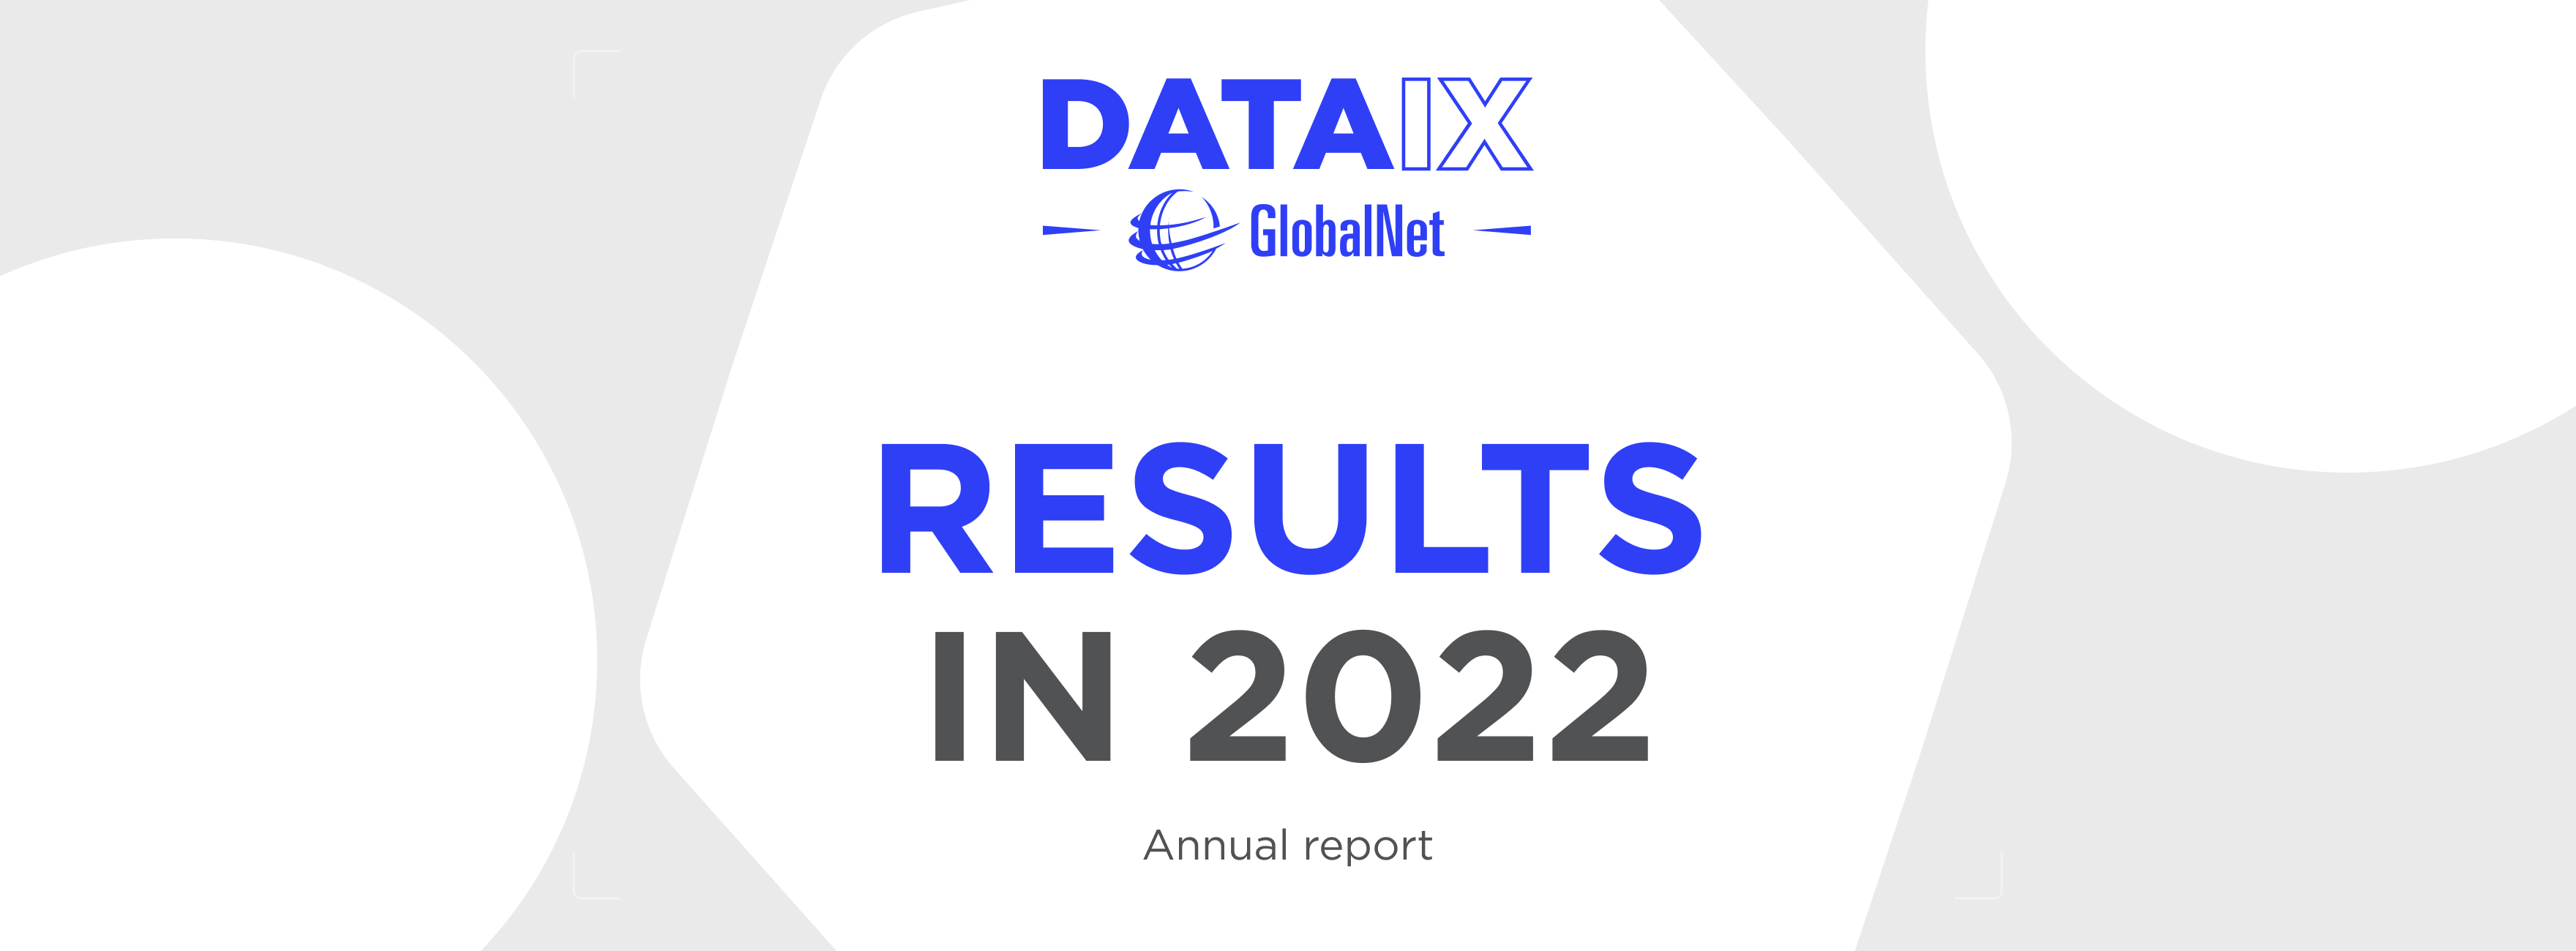 The GlobalNet/DATAIX Annual report 2022